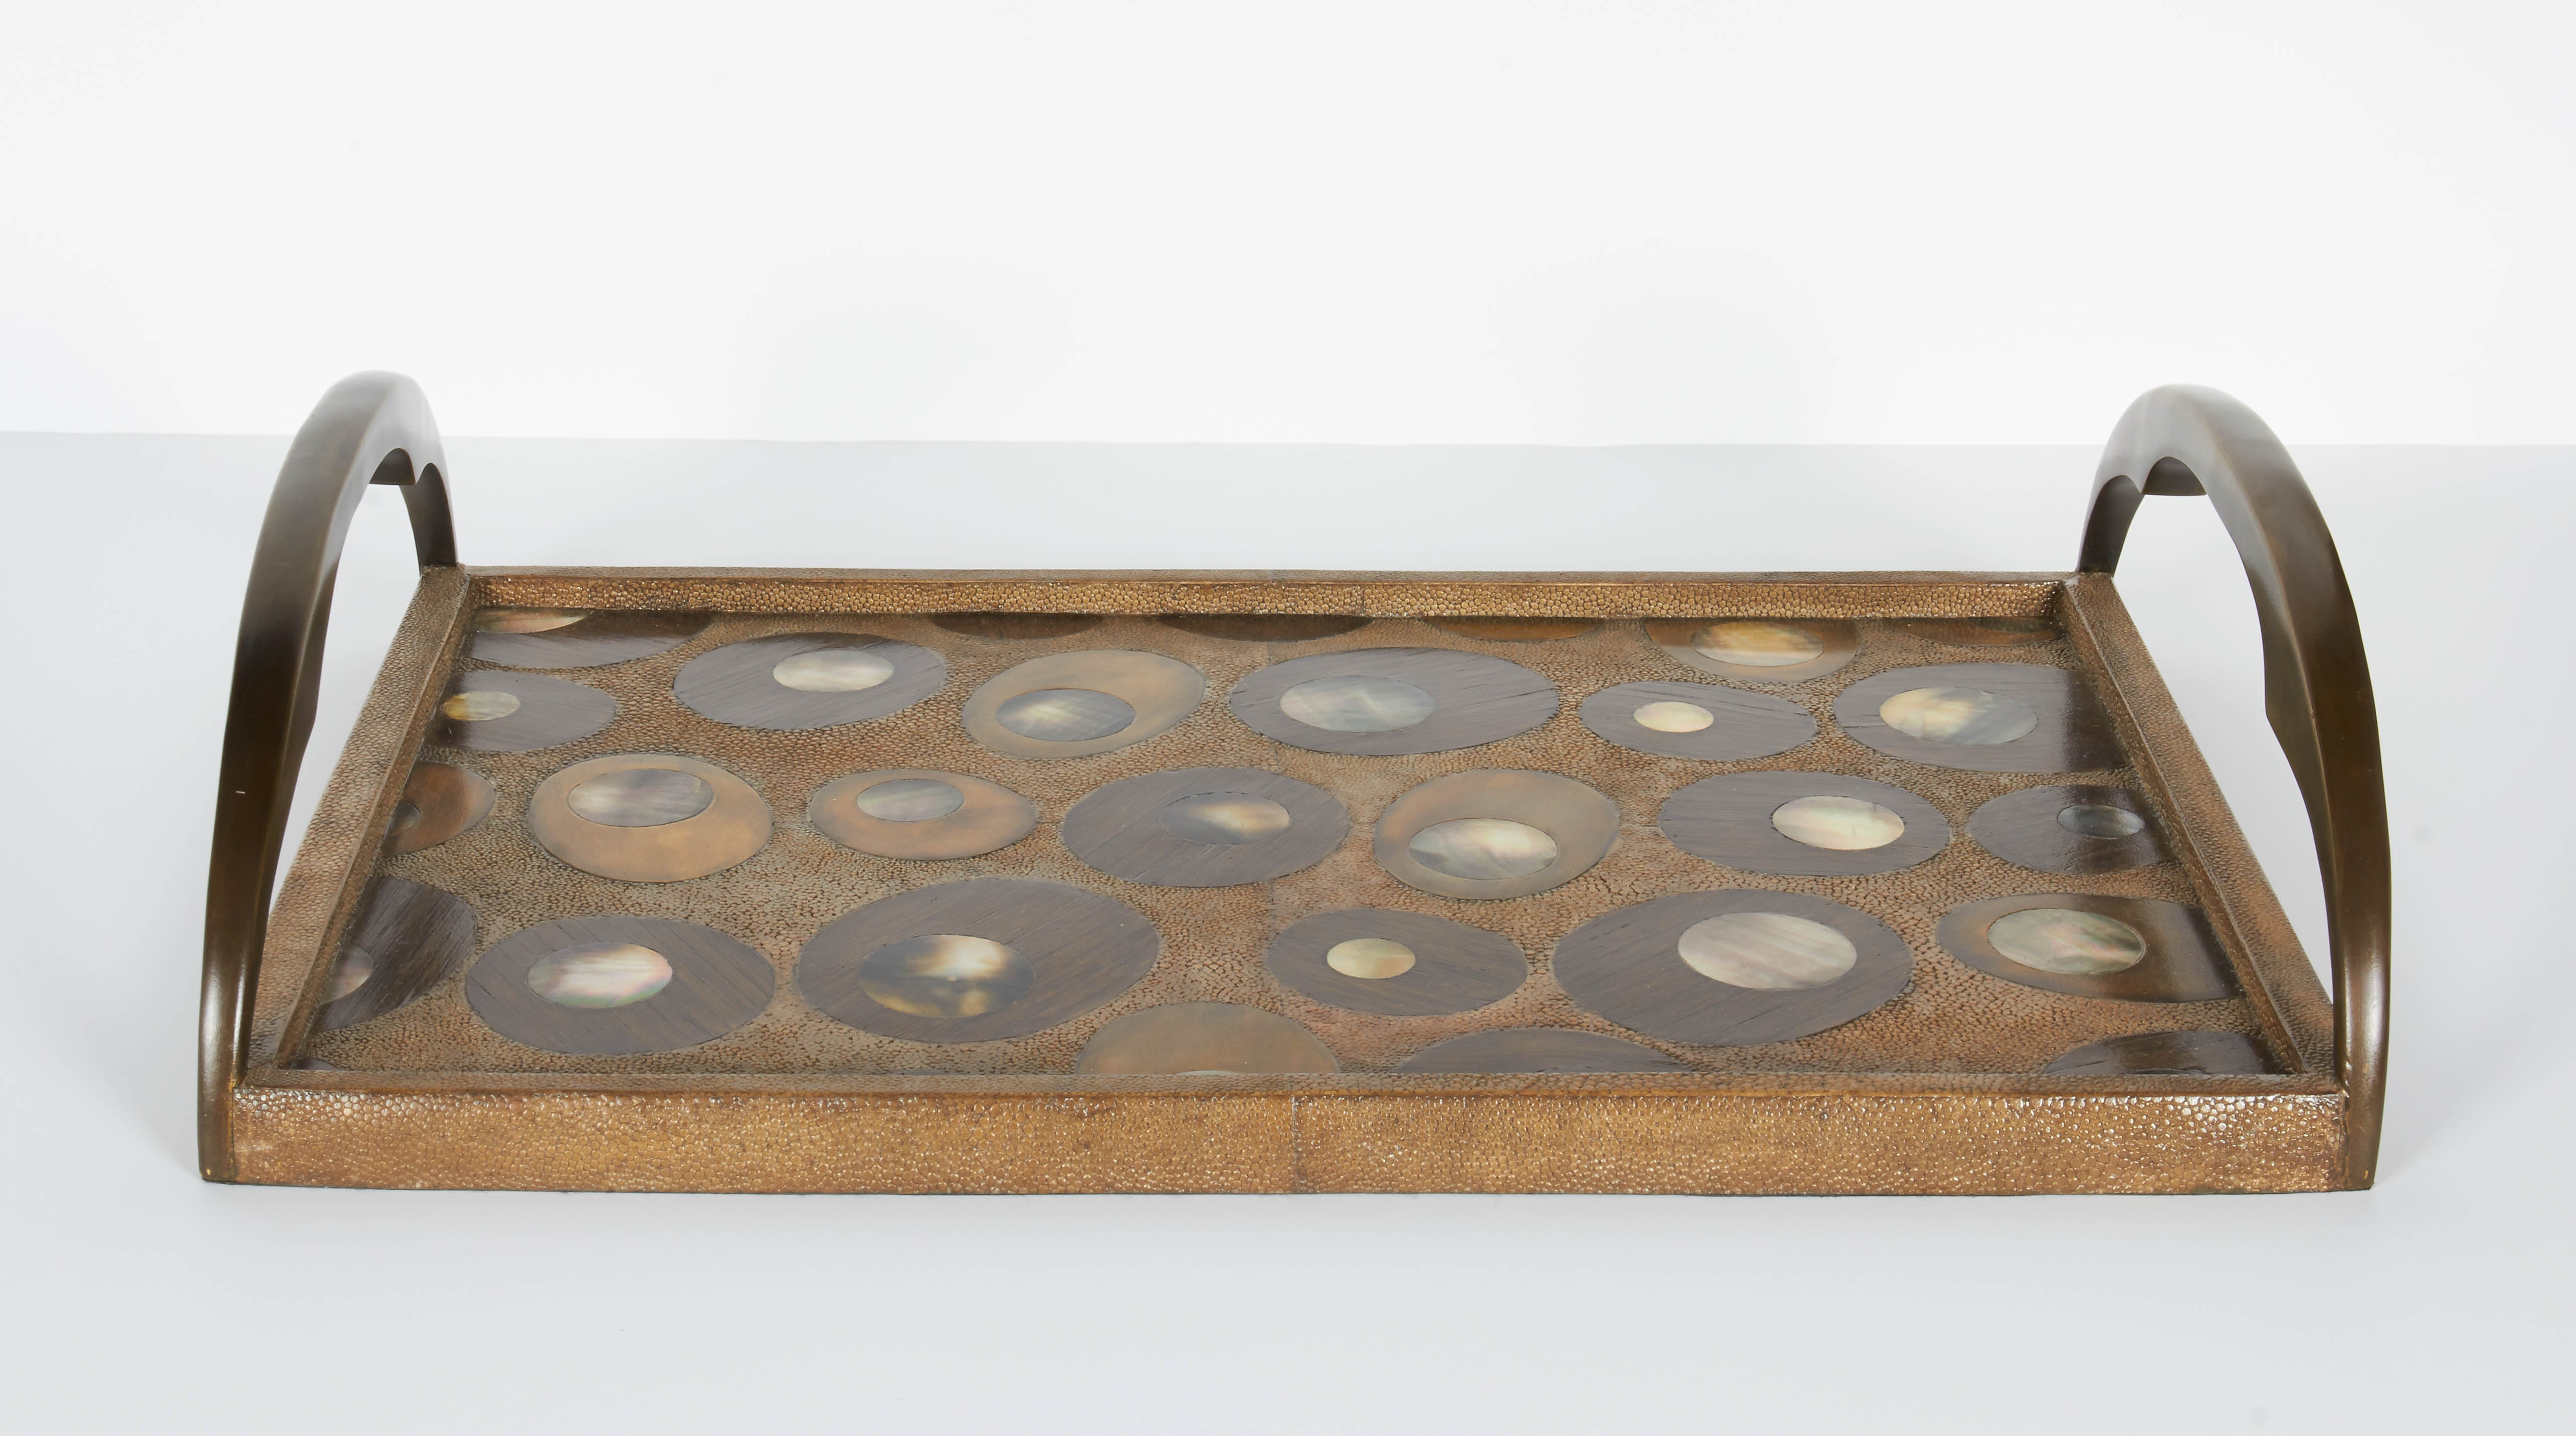 Exquisite serving tray features a variety of exotic materials and is all handcrafted. Covered in shagreen with hues of tan, and features mother of pearl inlays over palmwood insets. The combination creates a beautiful concentric and geometric